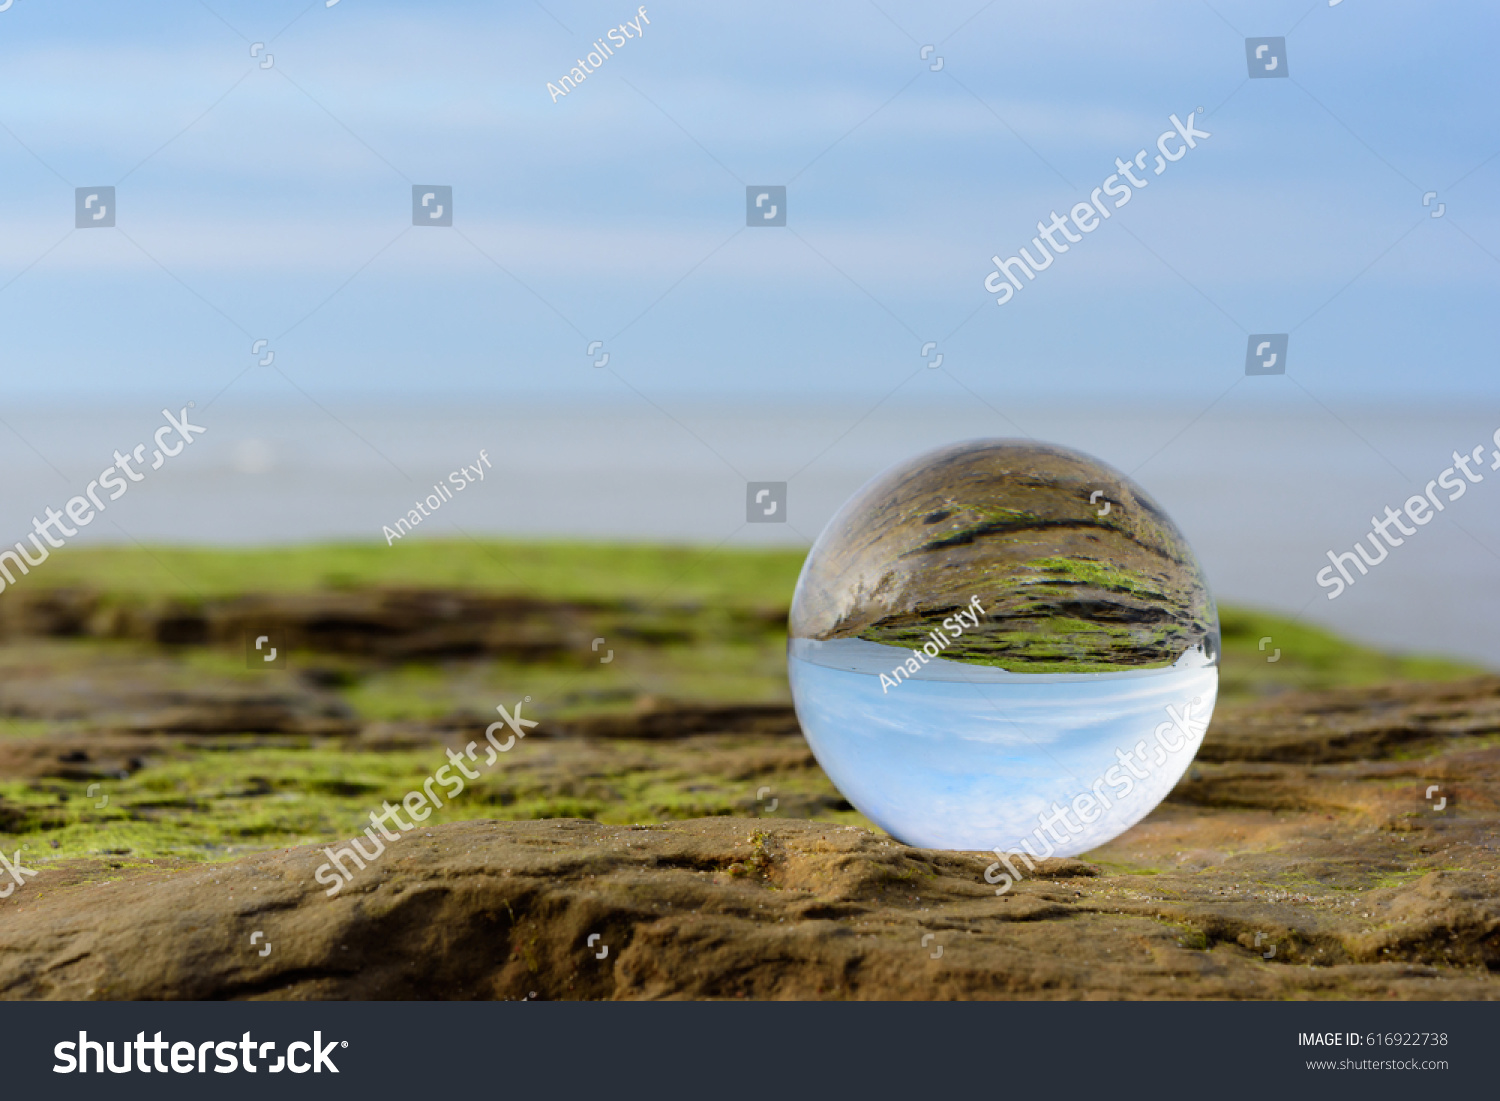 Seashore is reflected inside the crystal ball #616922738